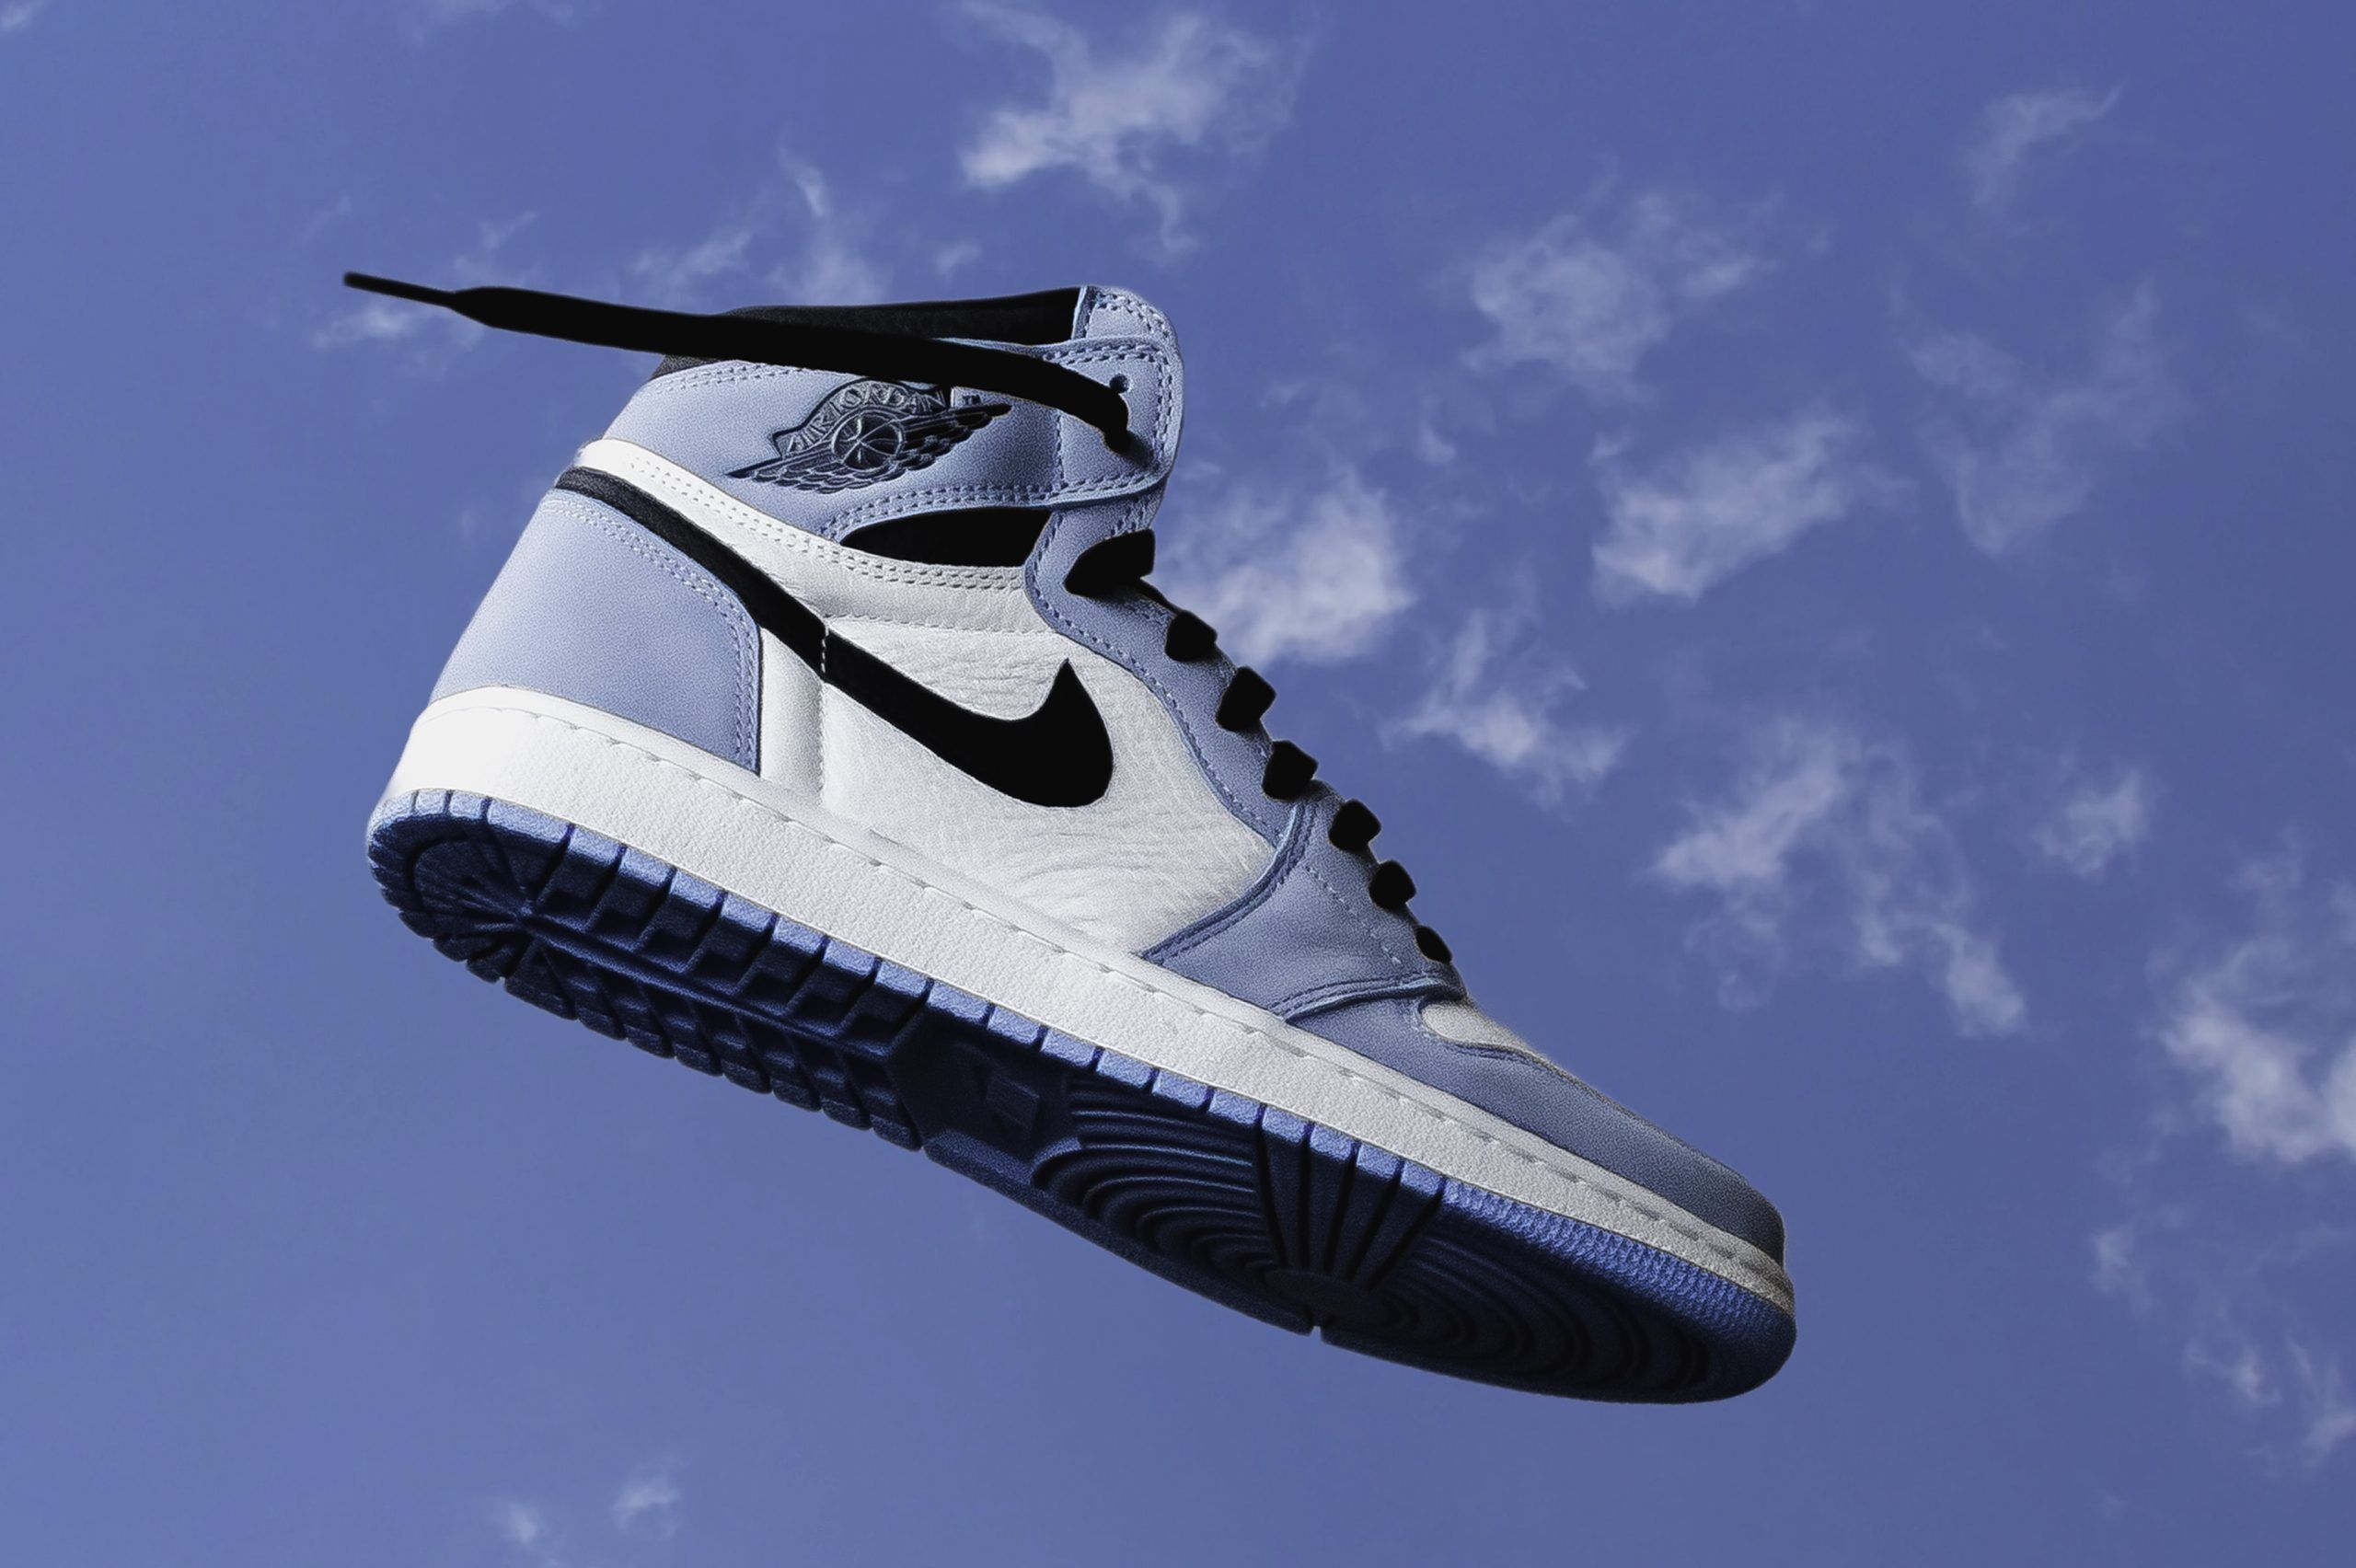 5 most expensive sneakers ever sold that make great investments